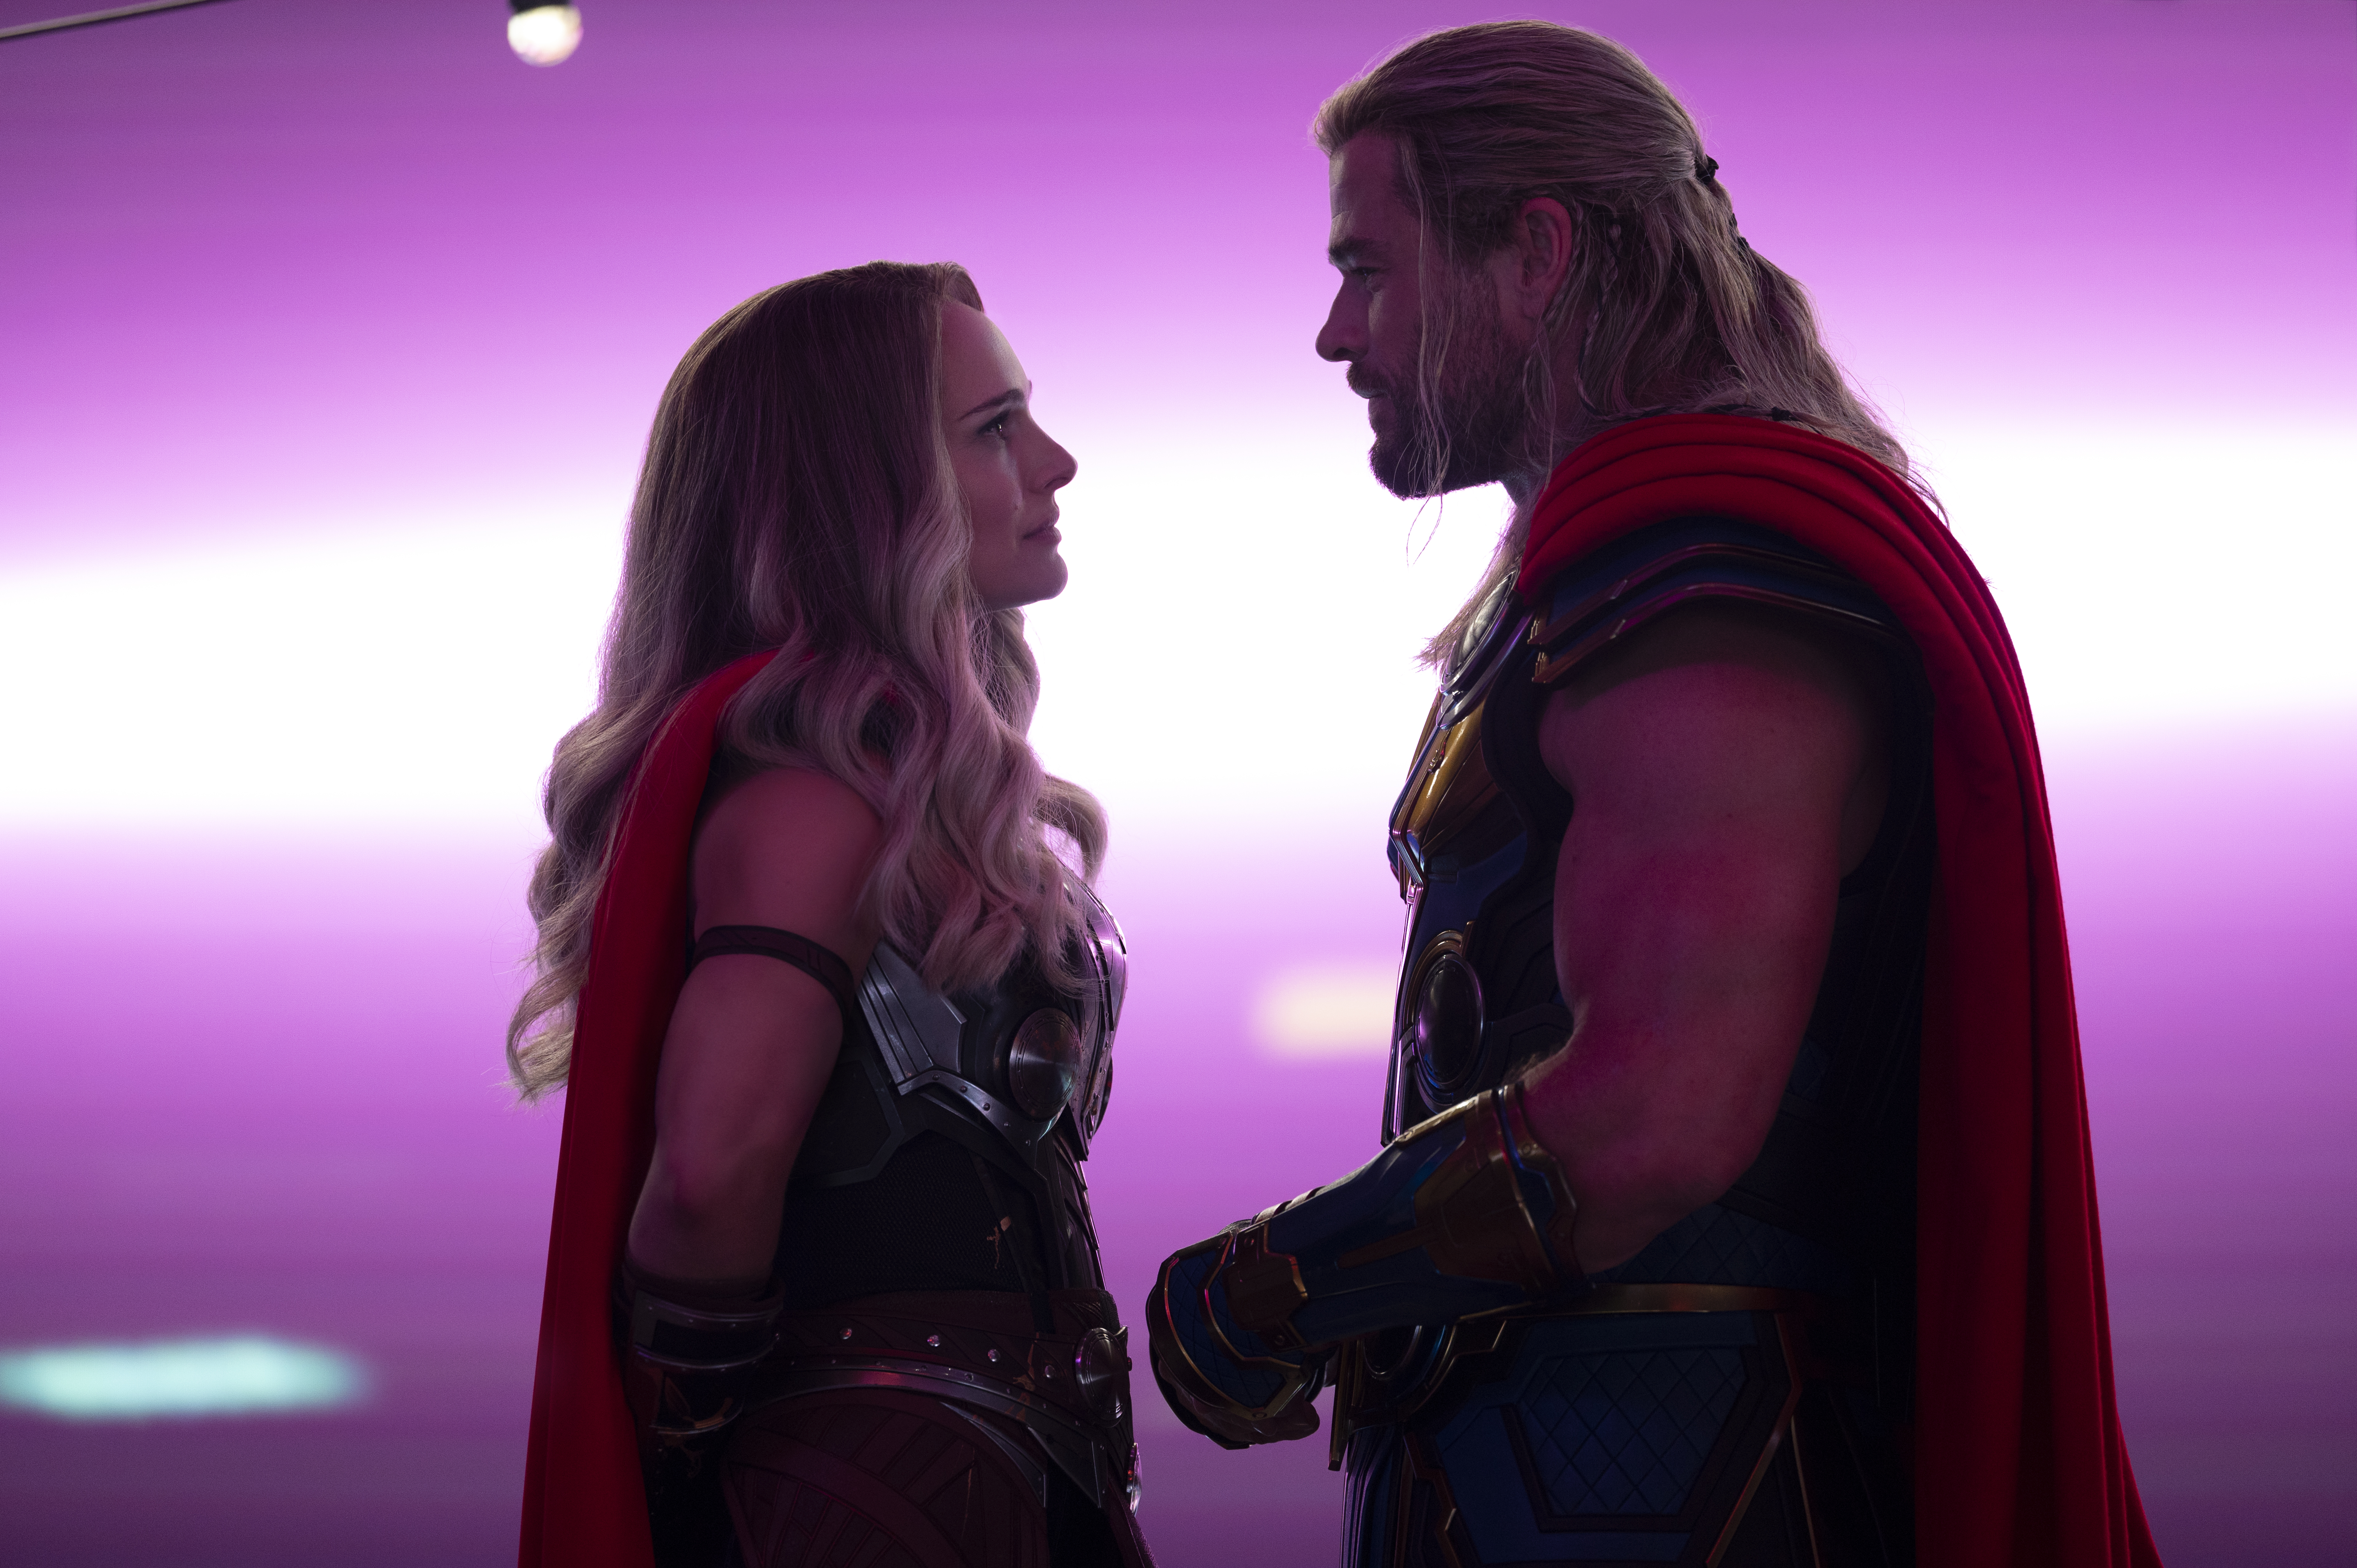 A reconciliation of Thors